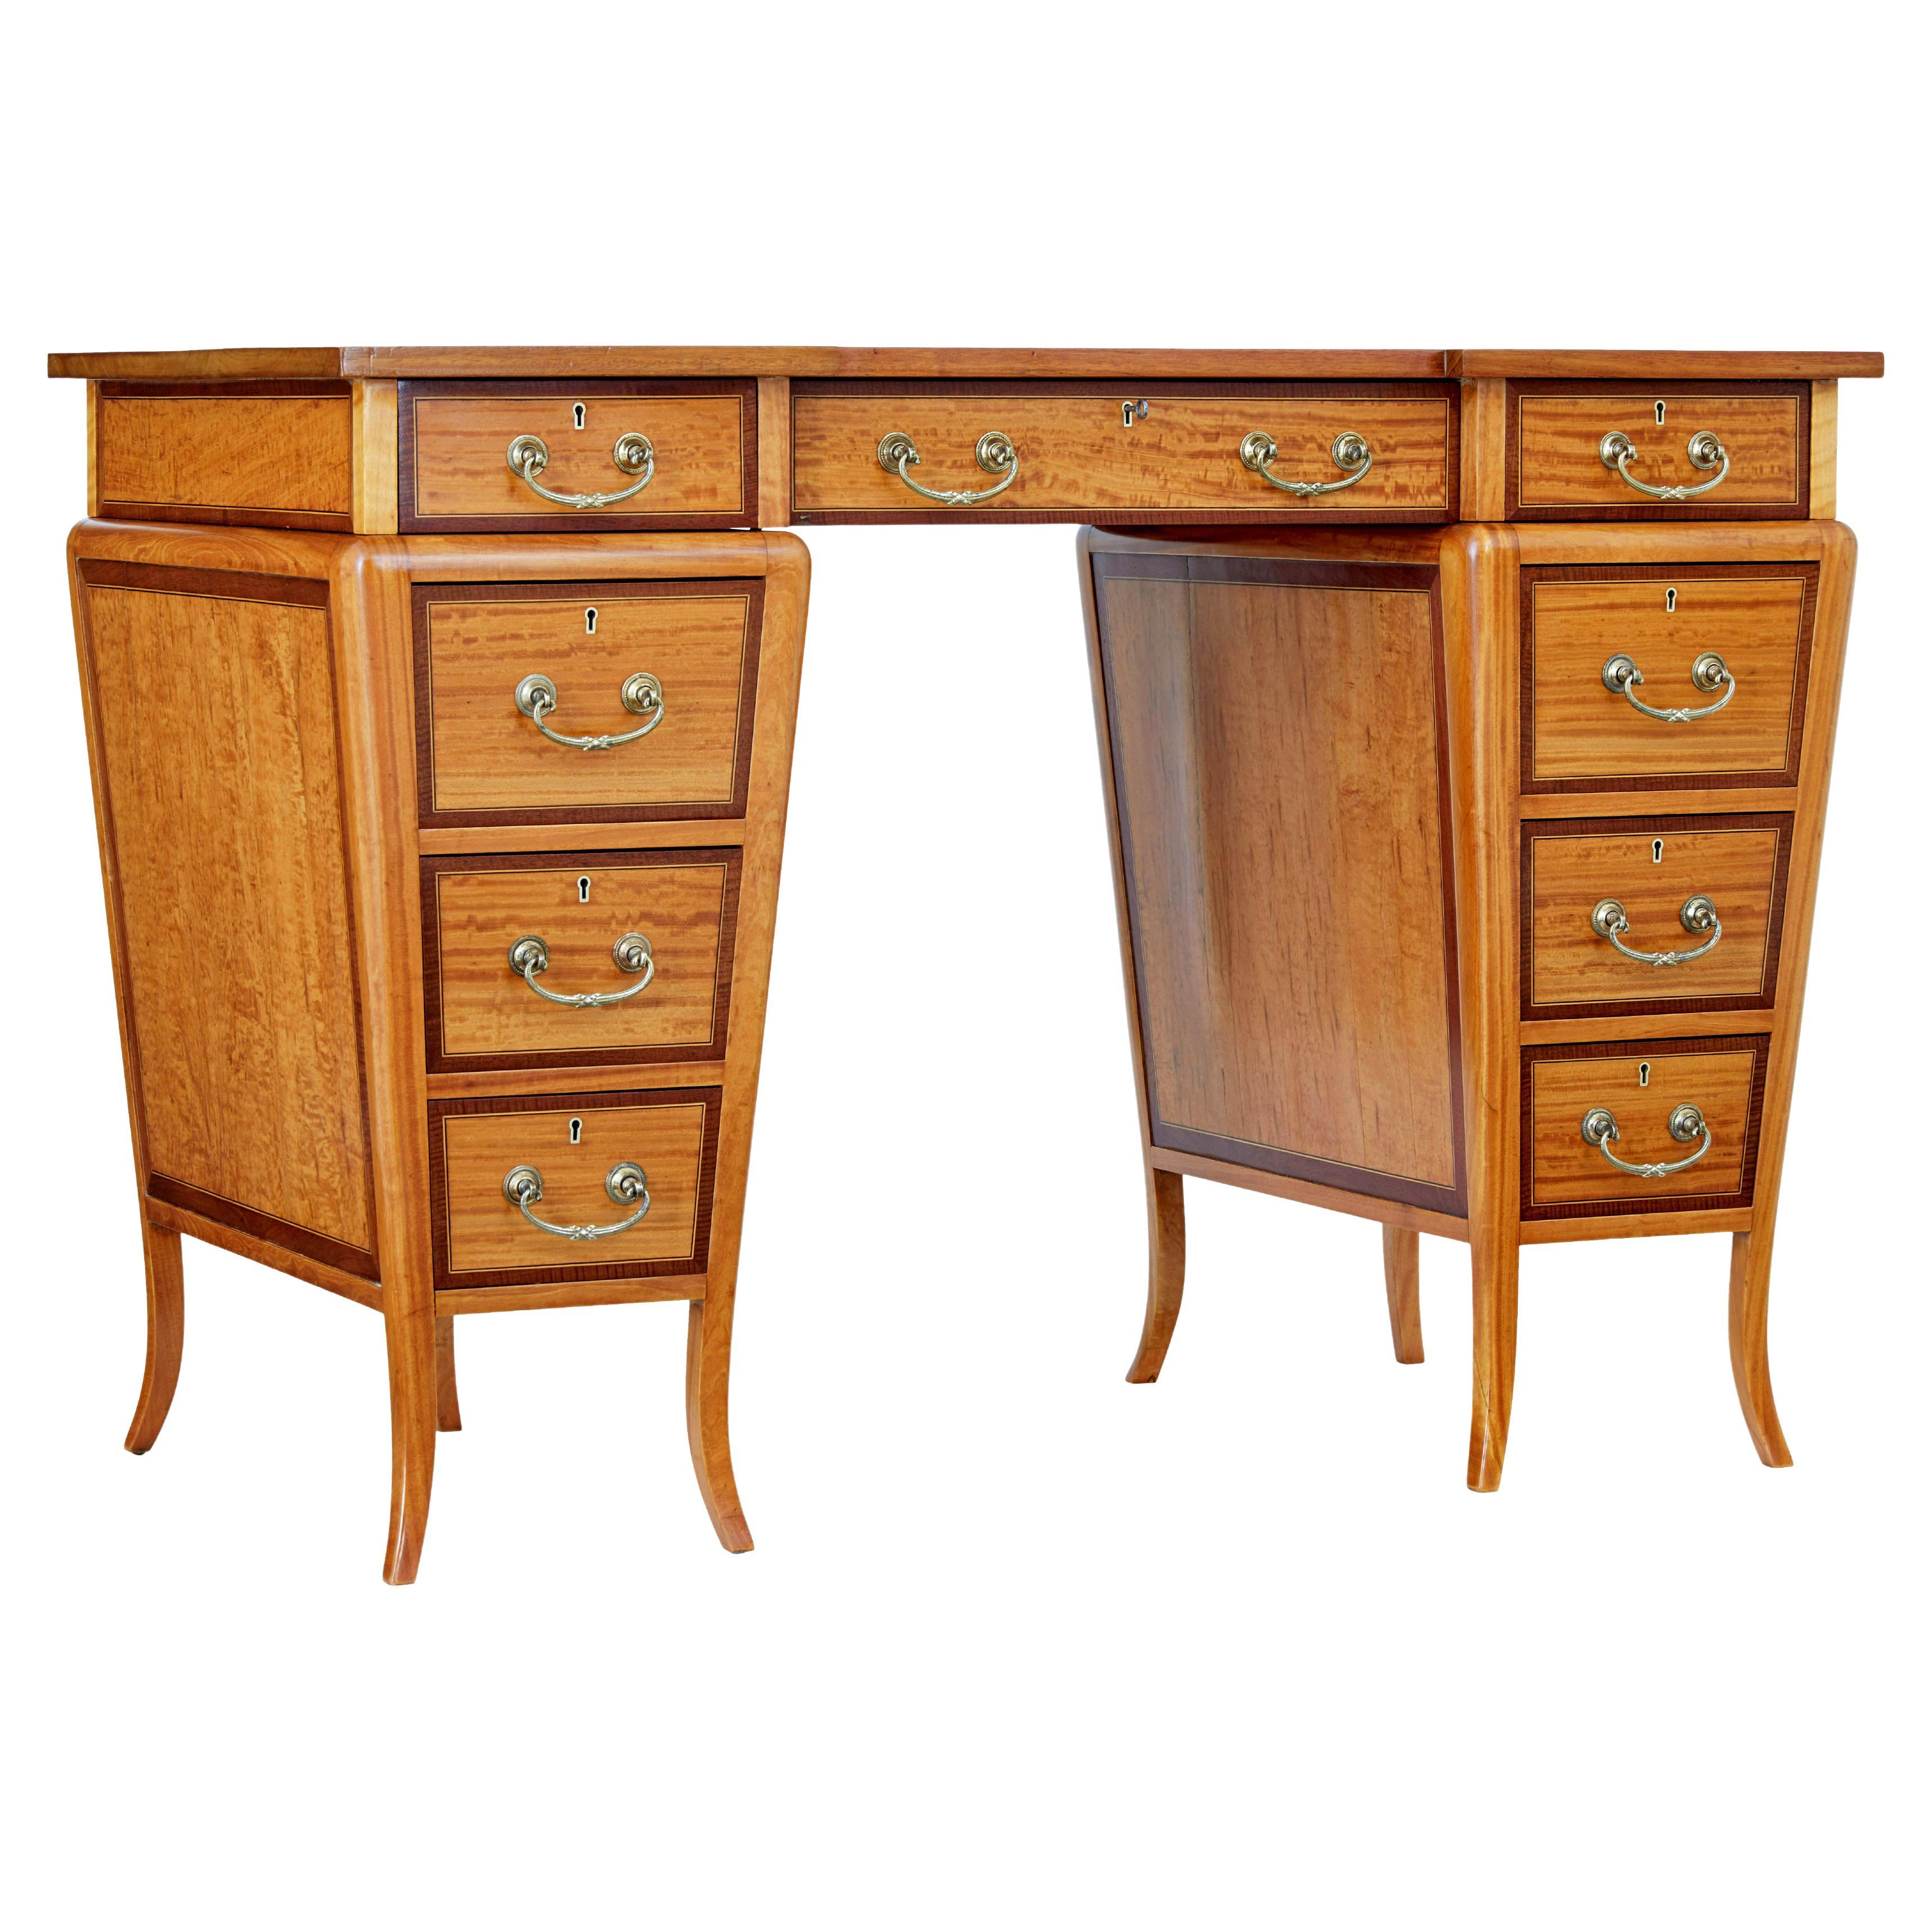 Early 20th century satinwood sheraton revival desk For Sale